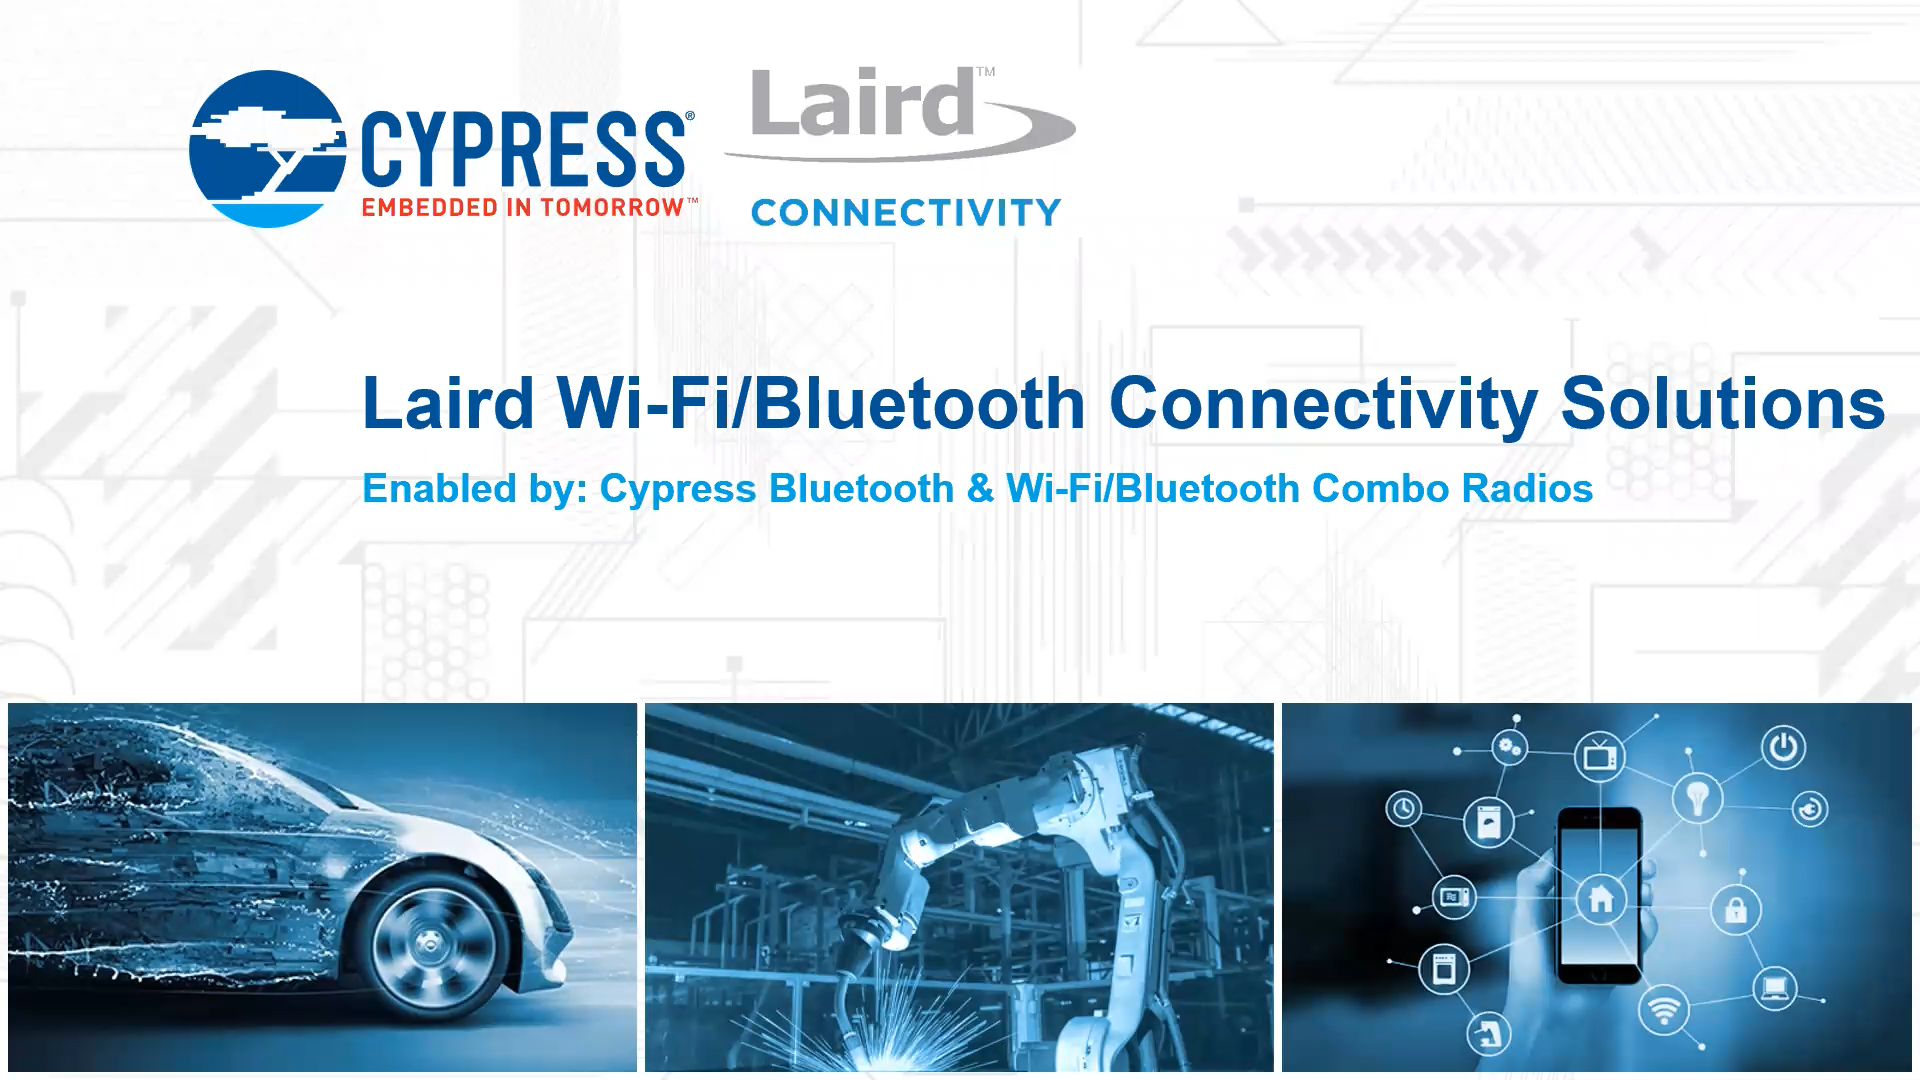 Navigate IoT Design Challenges Using Laird Connectivity's Wi-Fi & Bluetooth Modules Powered by Cypress